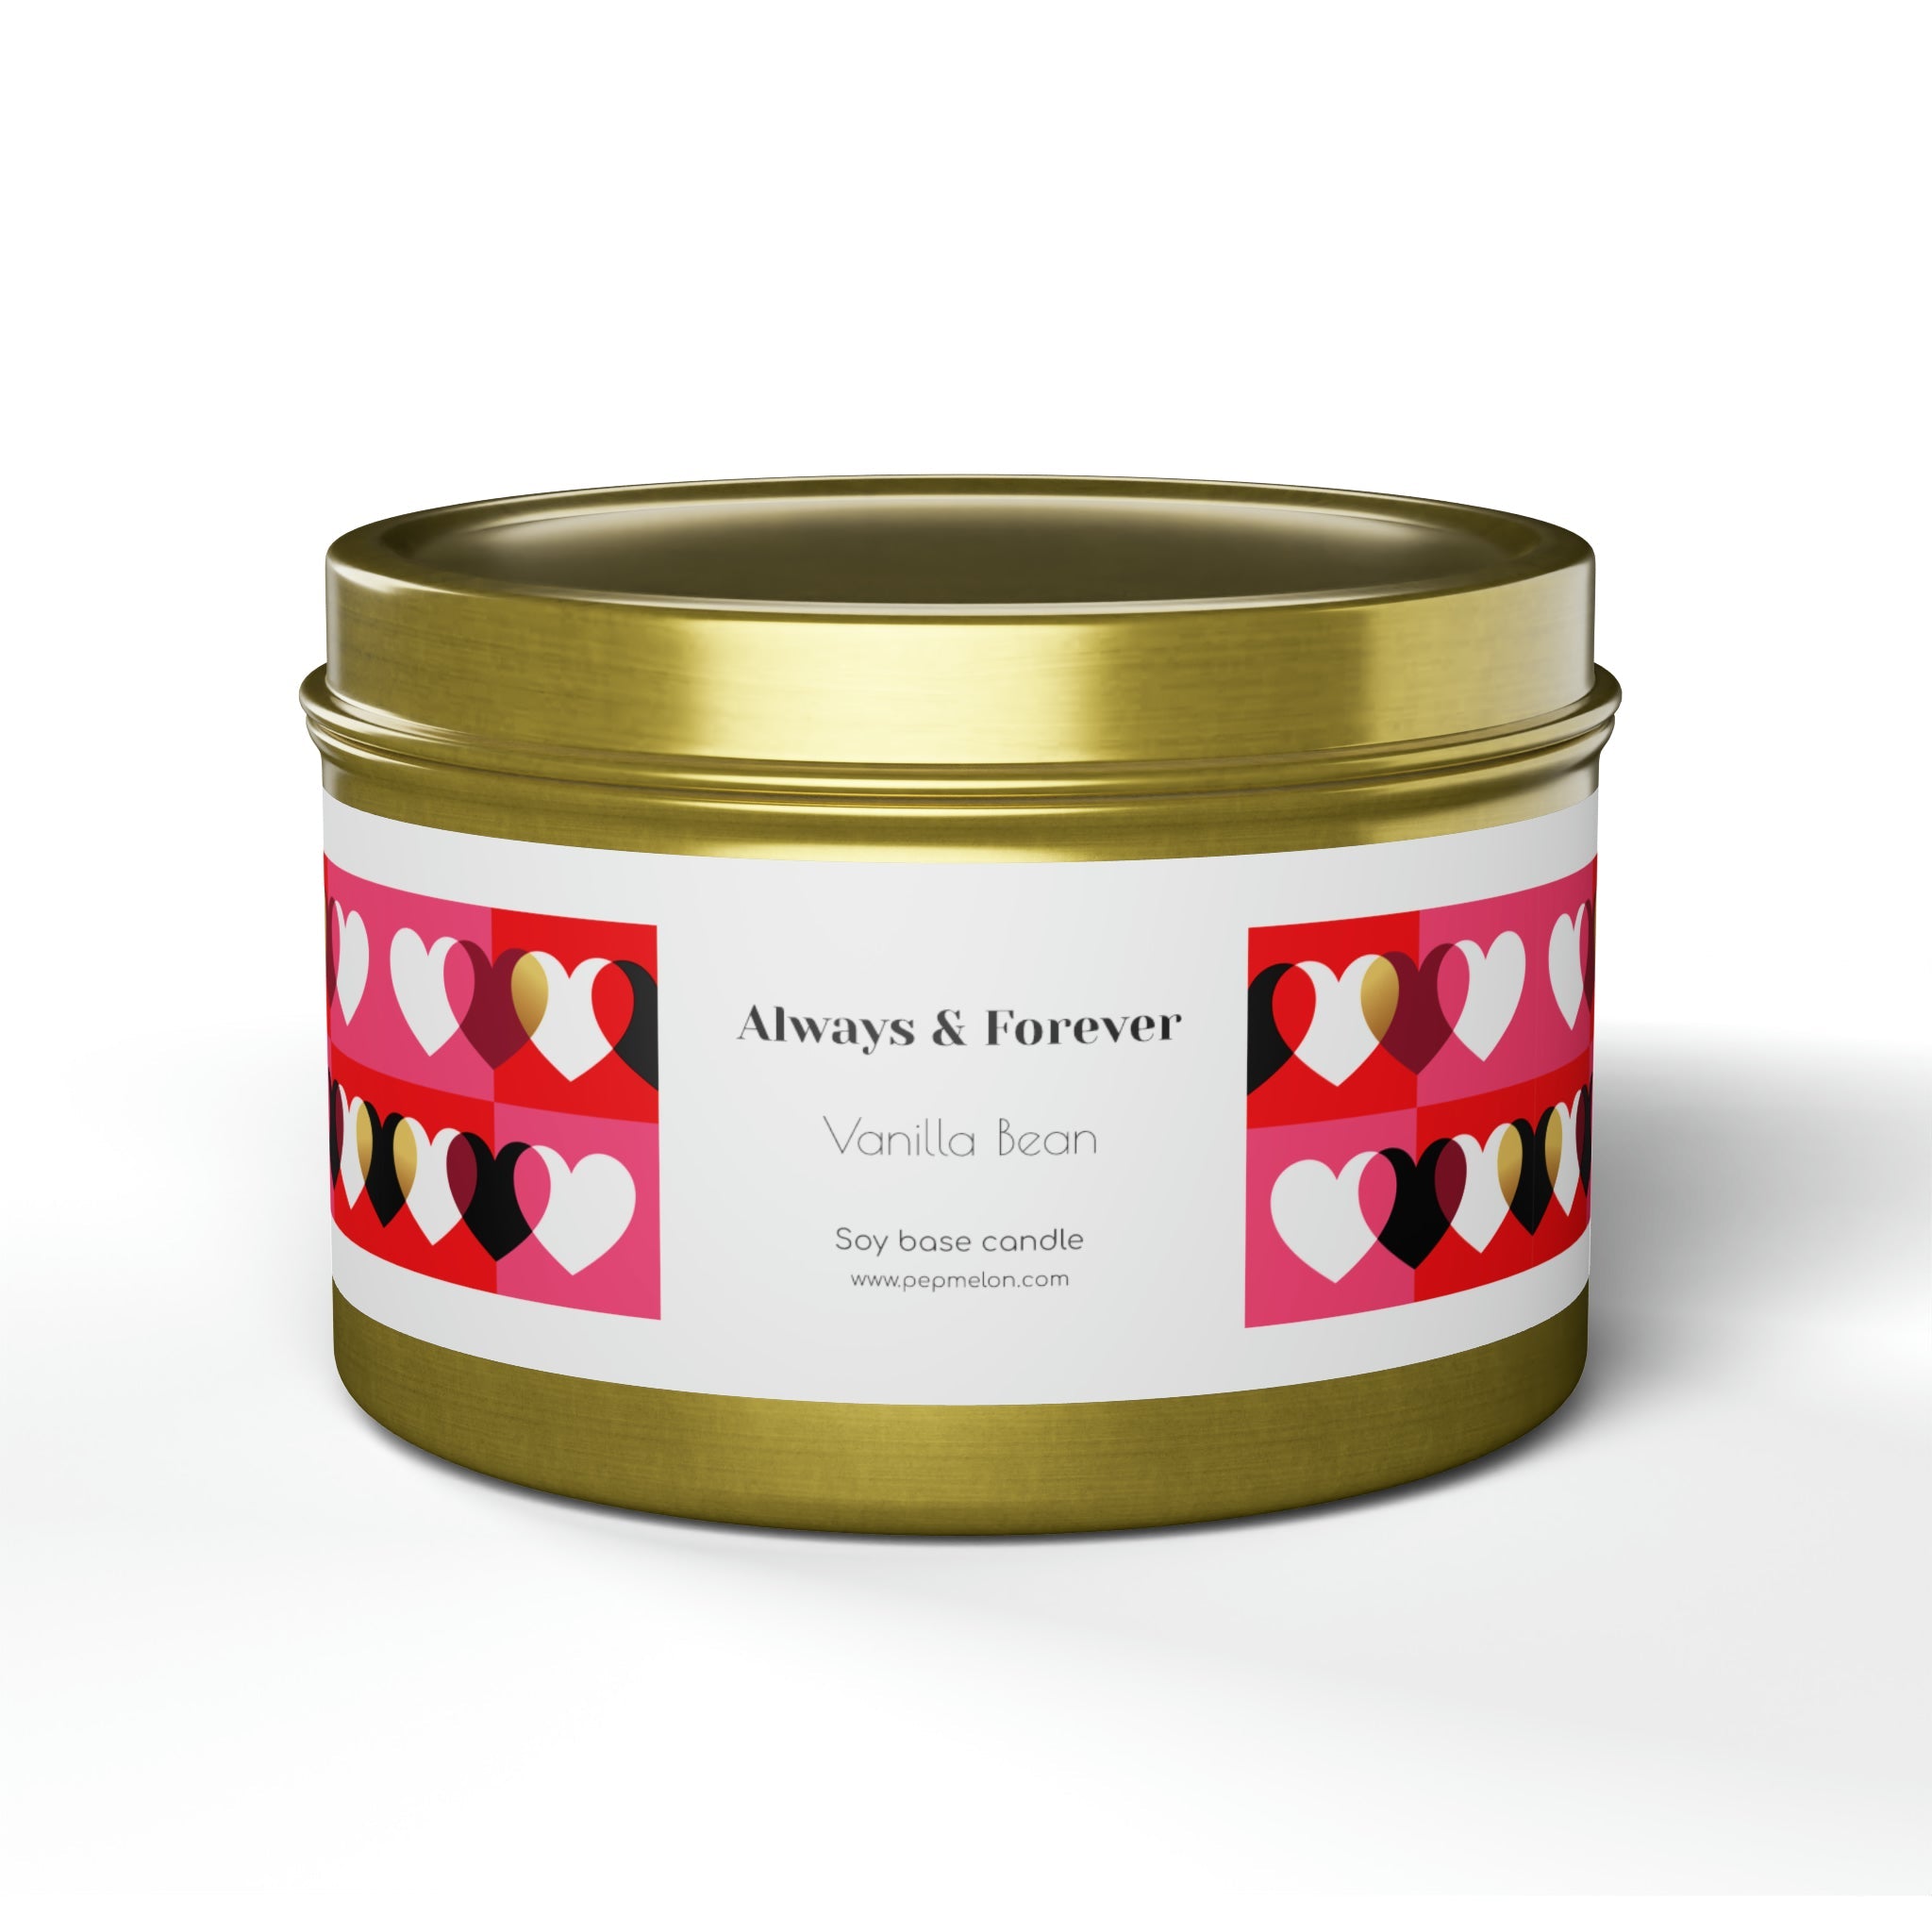 Vanilla Bean Always & Forever Soy base candle love, valentine's day gift Tin Candles-4